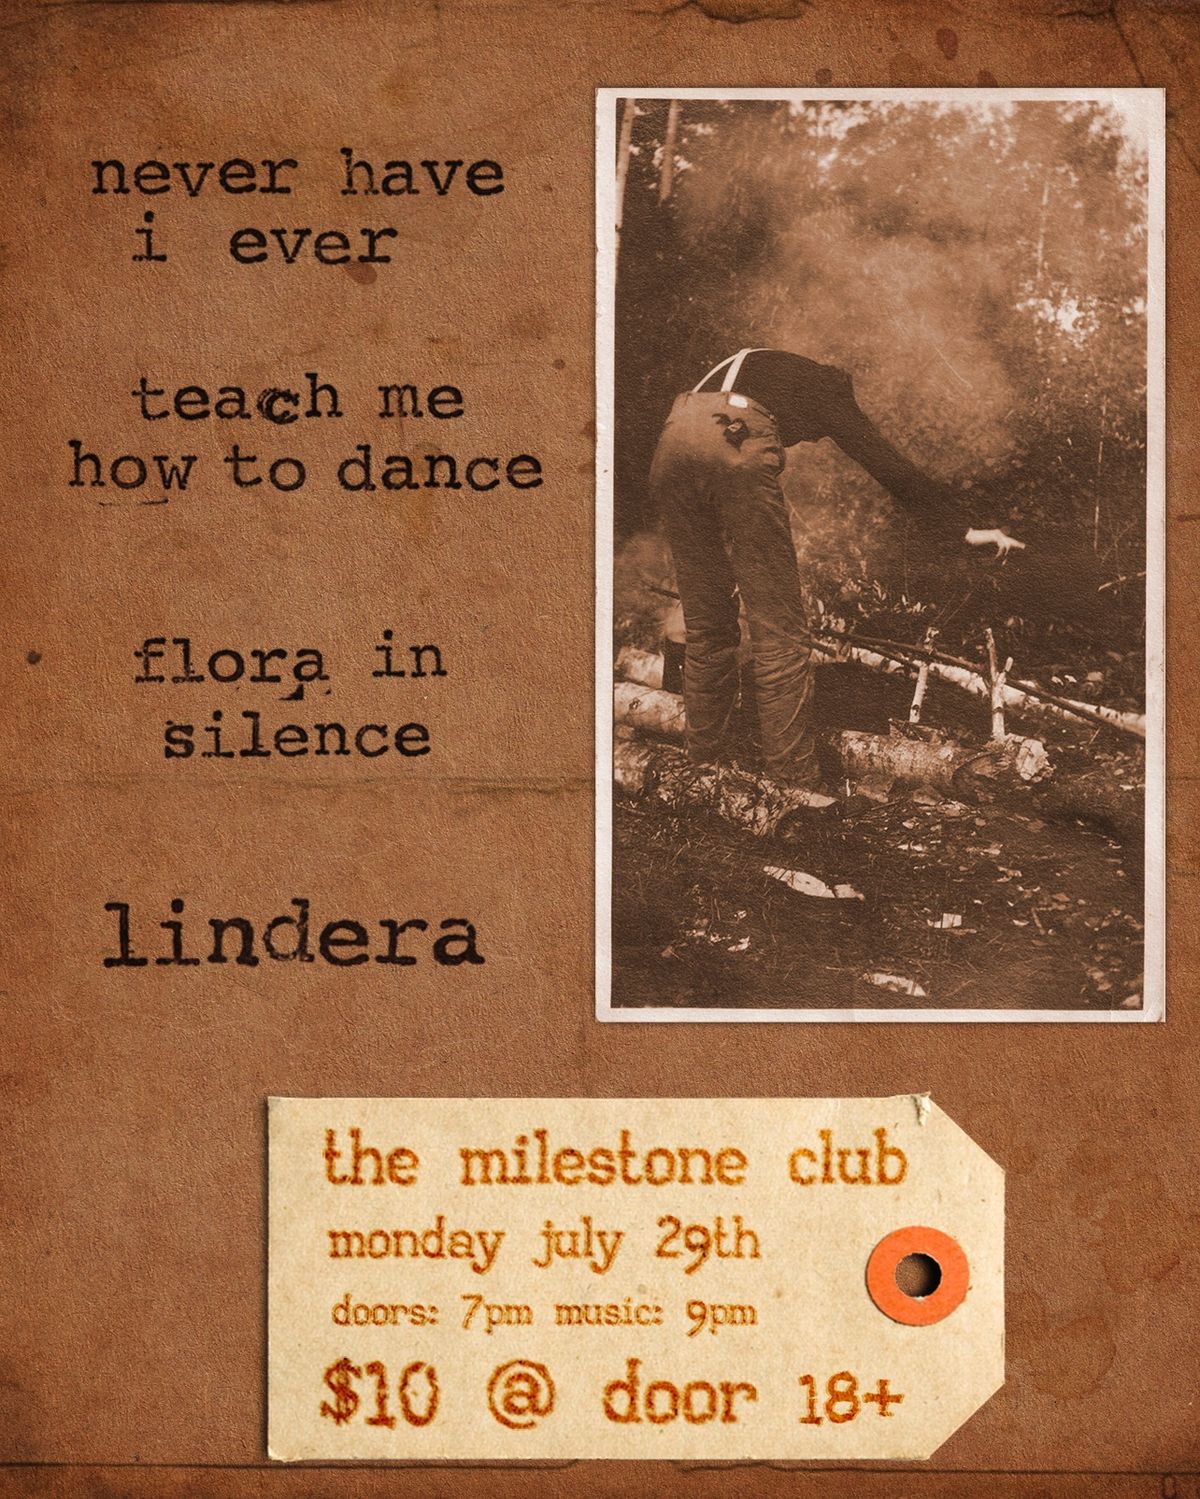 NEVER HAVE I EVER w\/ TEACH ME HOW TO DANCE, FLORA IN SILENCE, YTHGRP & LINDERA at The Milestone 7\/29